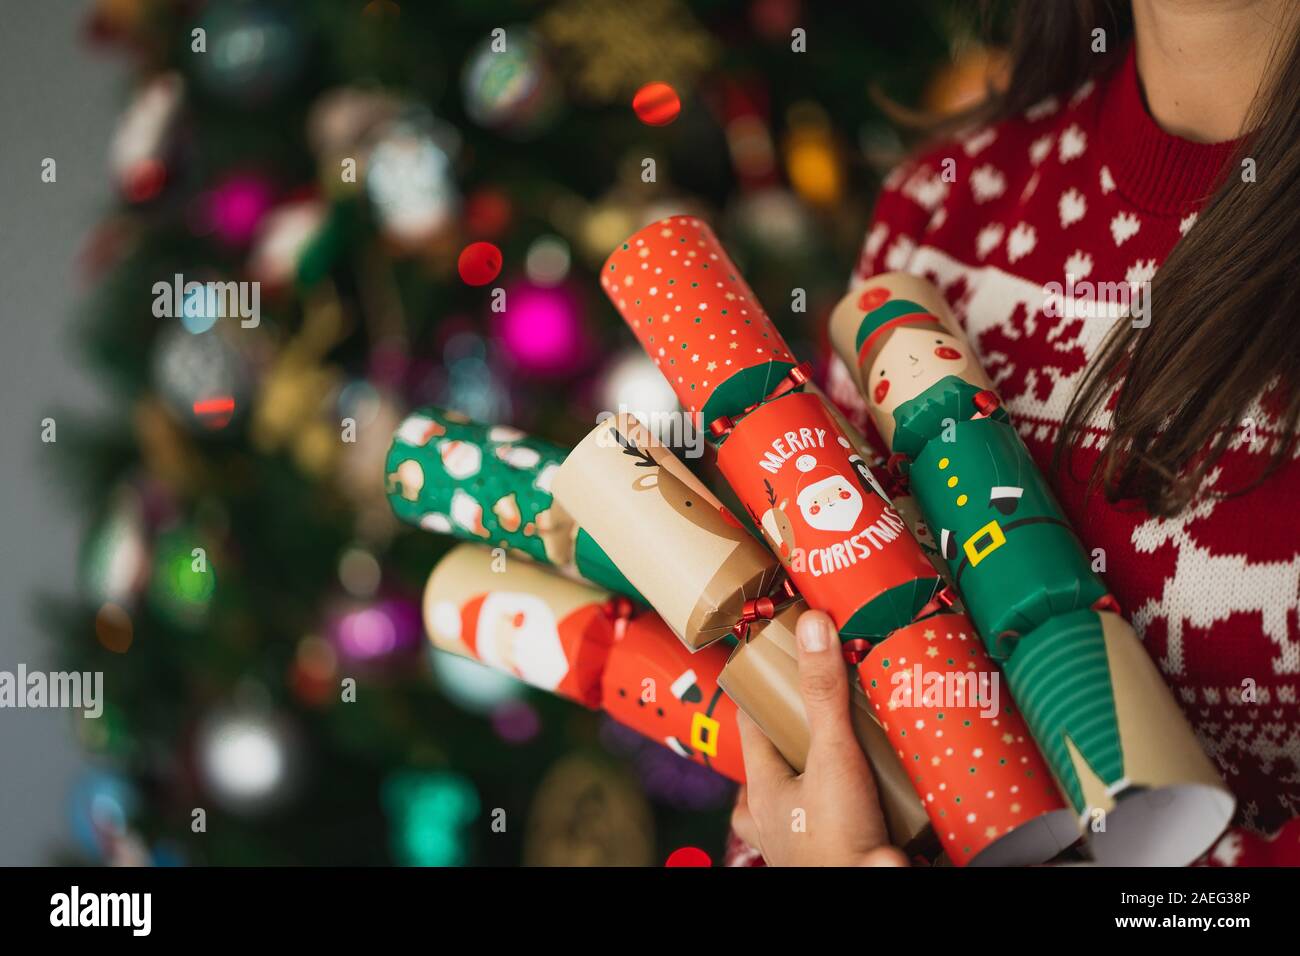 Woman Wearing a Christmas Sweater Holding Some Christmas Cracker on a Lighted Christmas tree. Stock Photo